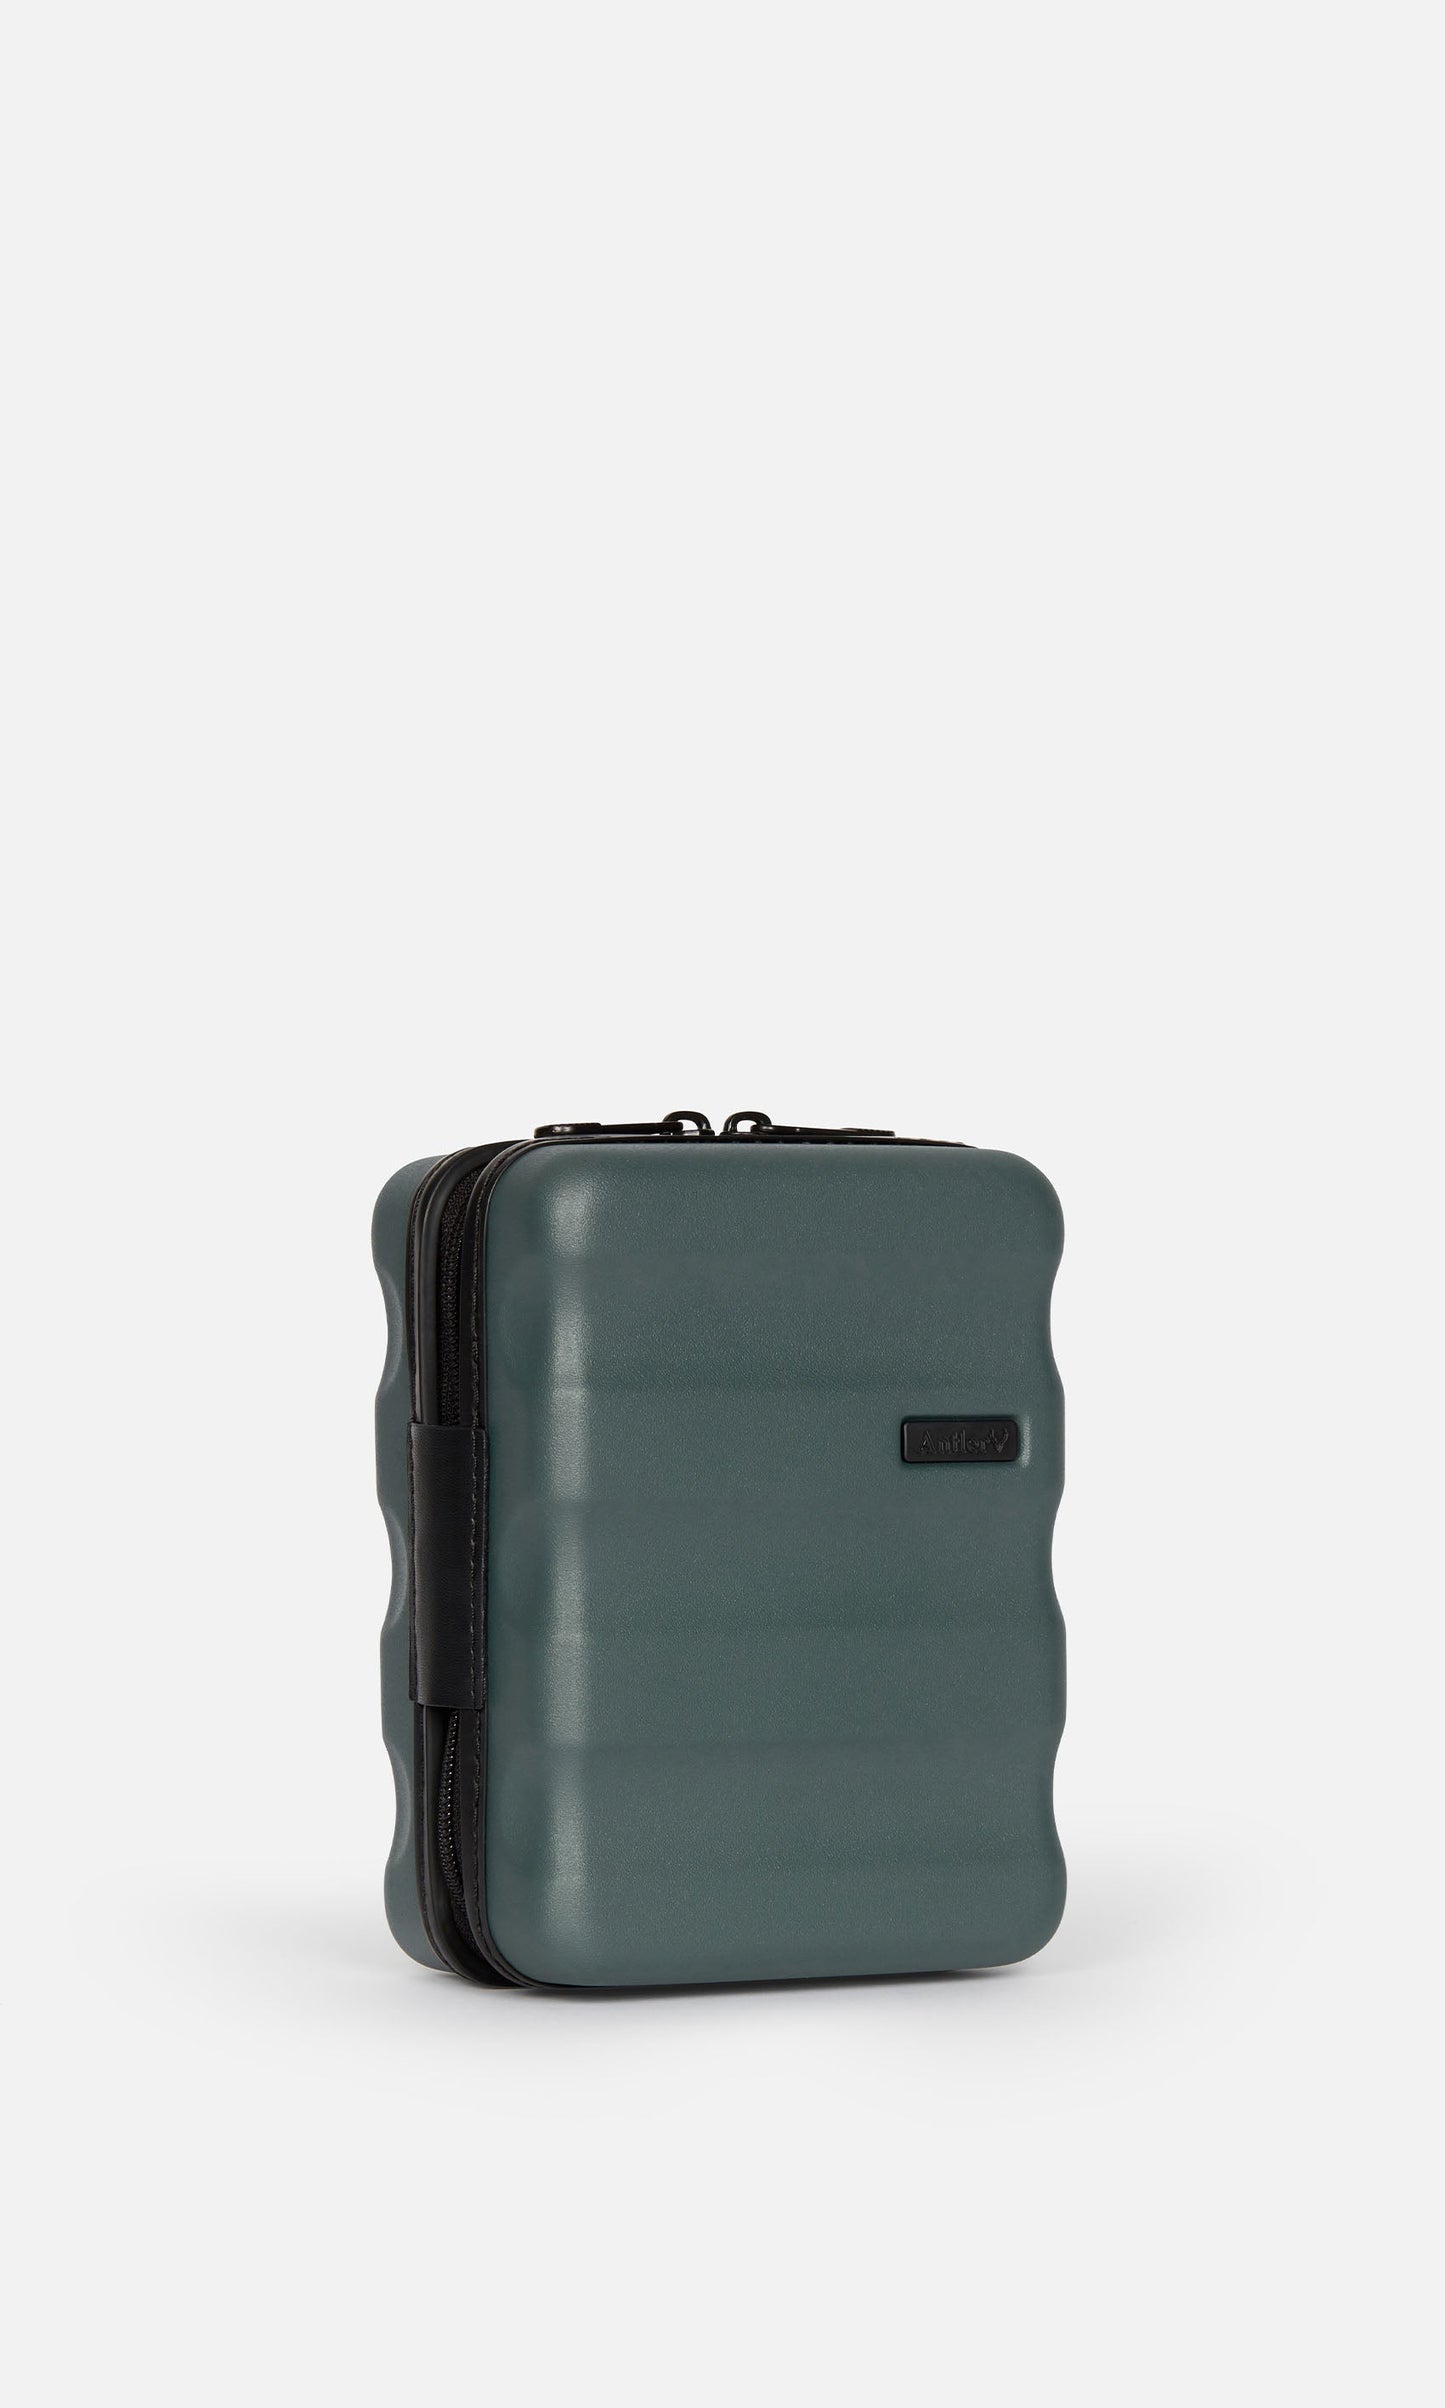 Antler Luggage -  Clifton mini in sycamore - Hard Suitcases Clifton Mini Case Sycamore (Green) | Travel Gifts & Accessories | Antler